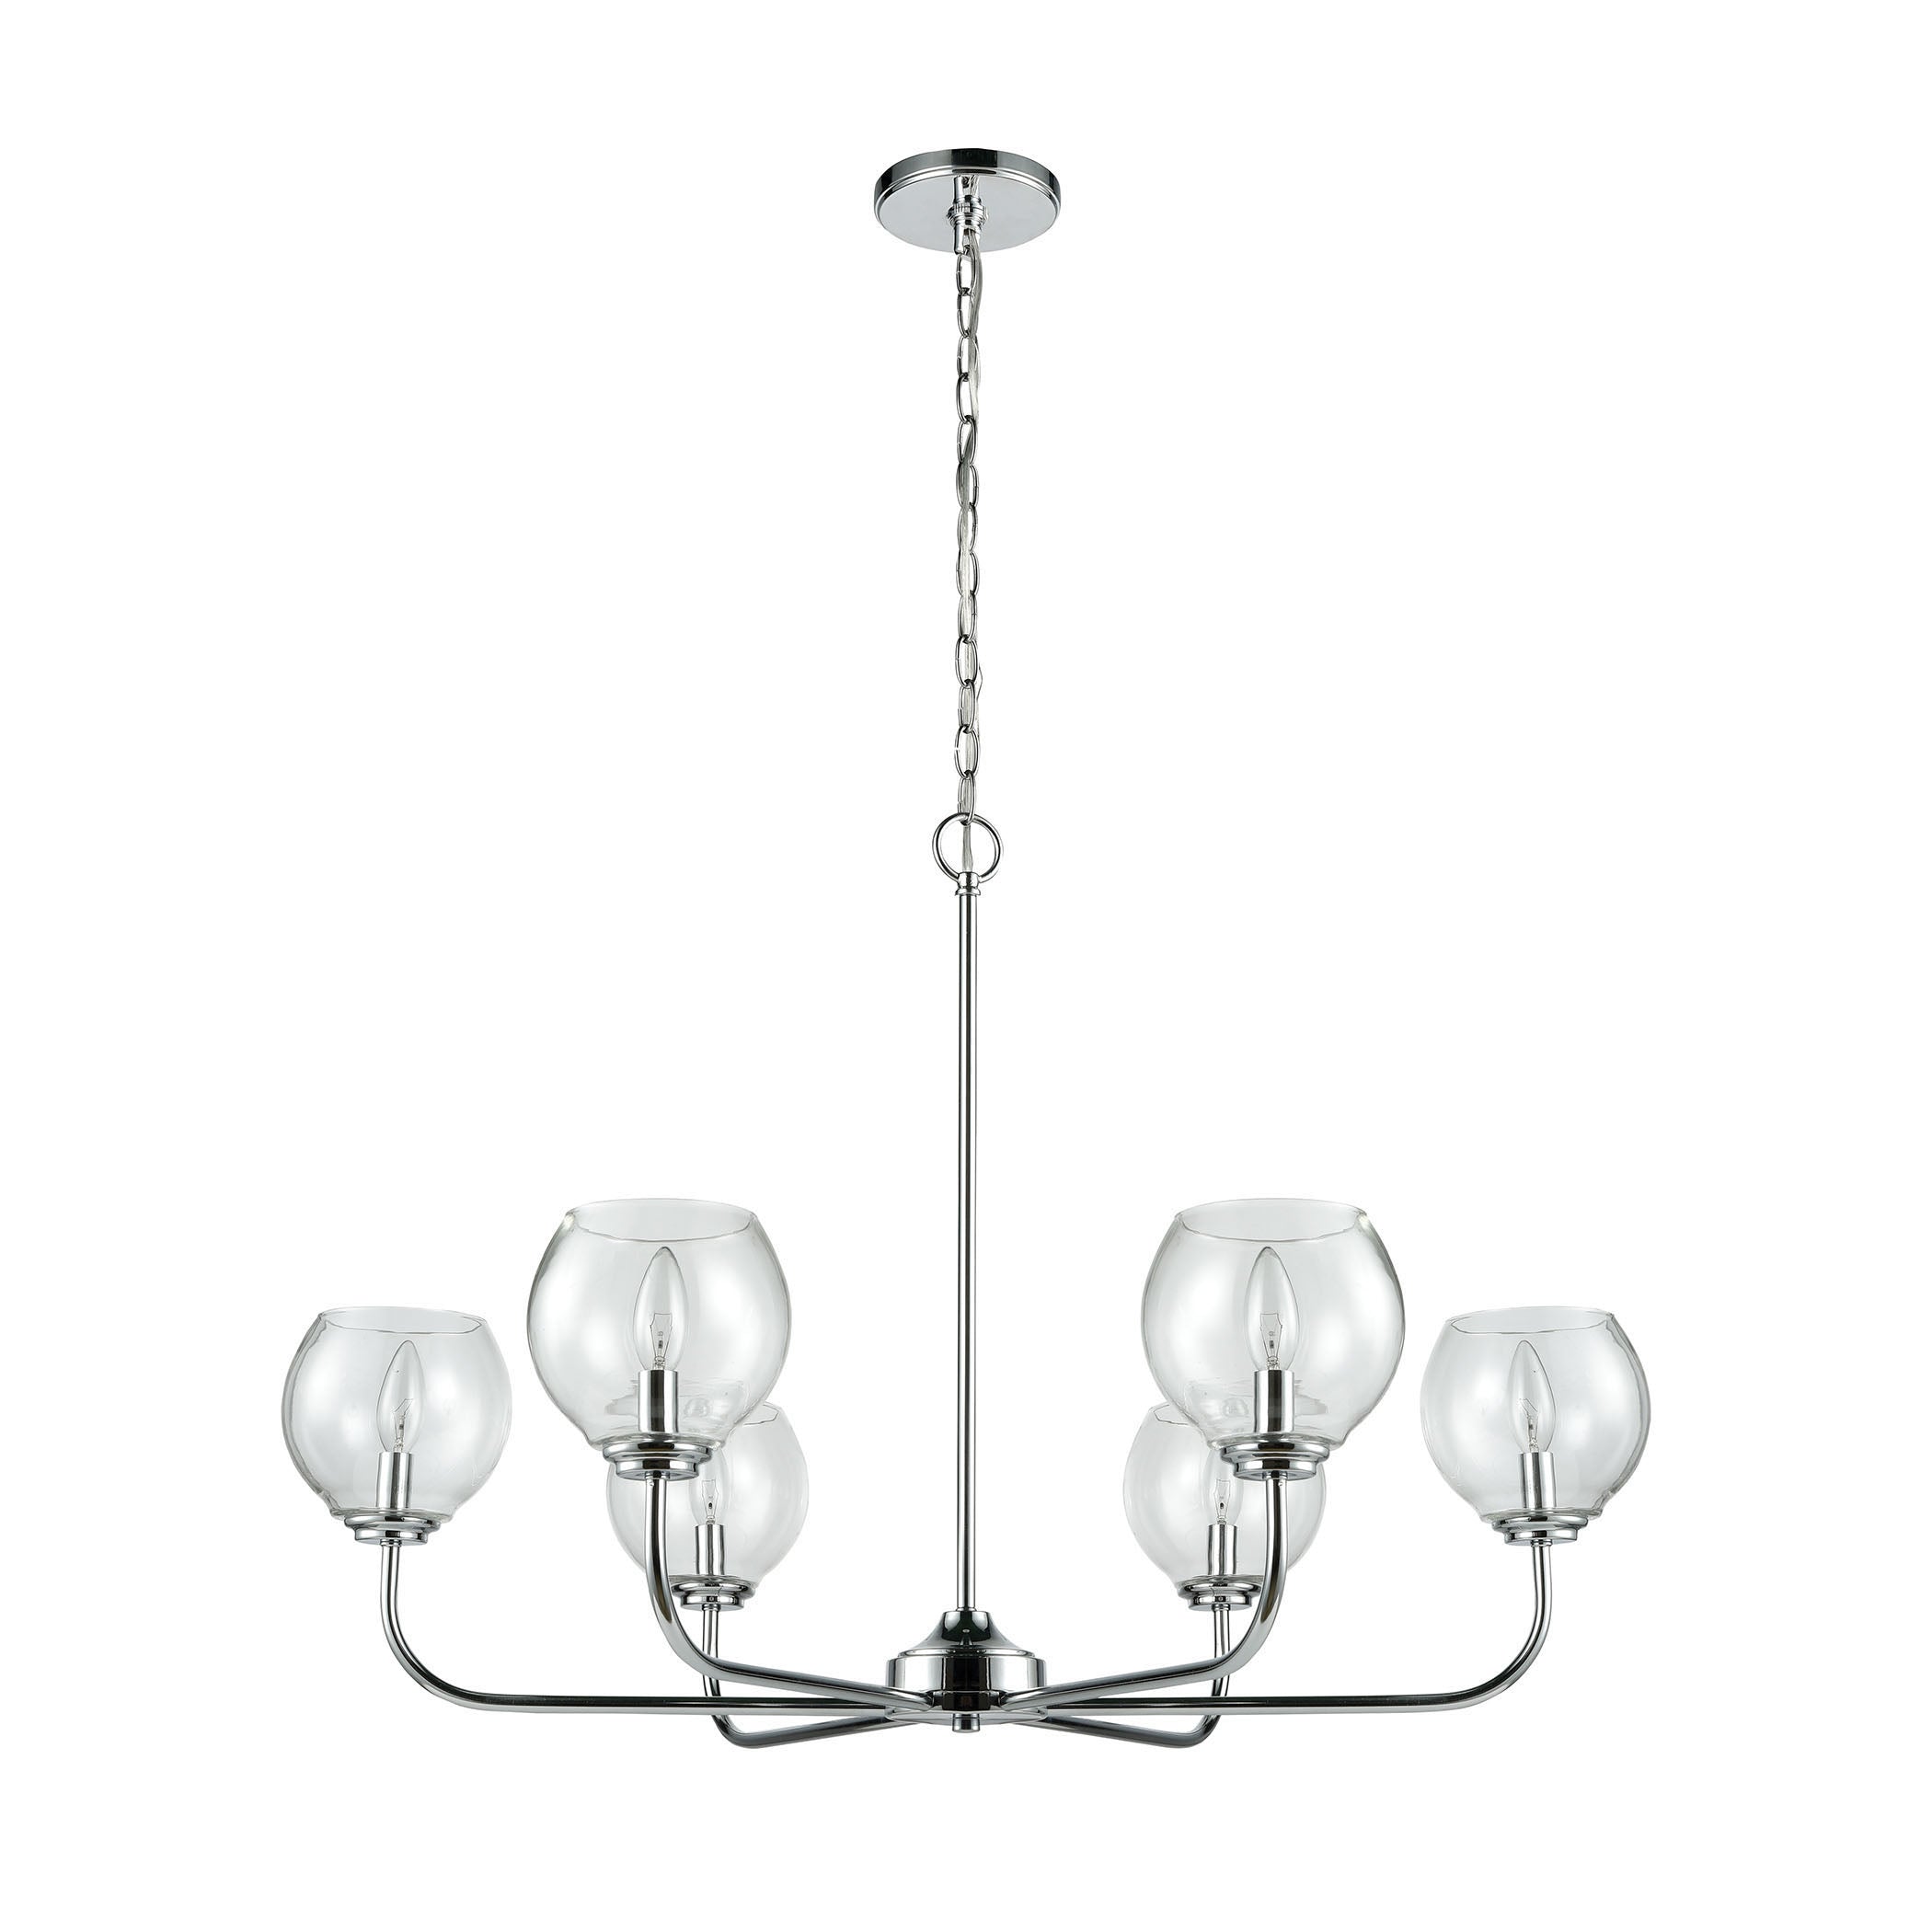 ELK Lighting 81364/6 Emory 6-Light Chandelier in Polished Chrome with Clear Blown Glass